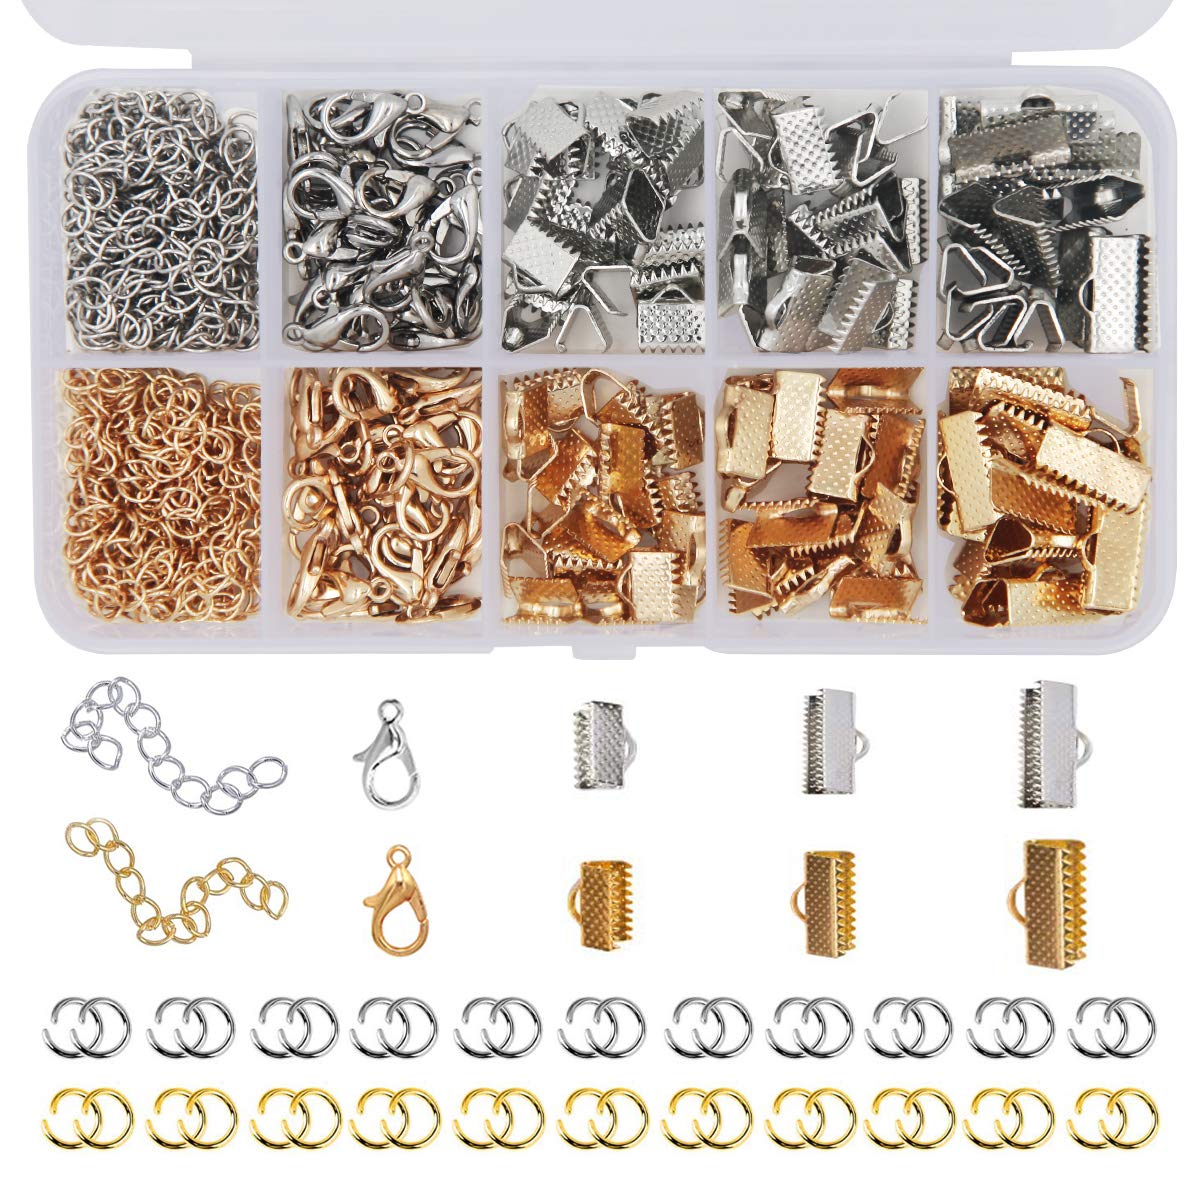 Jewelry Making Supplies Kit Includes Assorted Beads,jewelry Charms